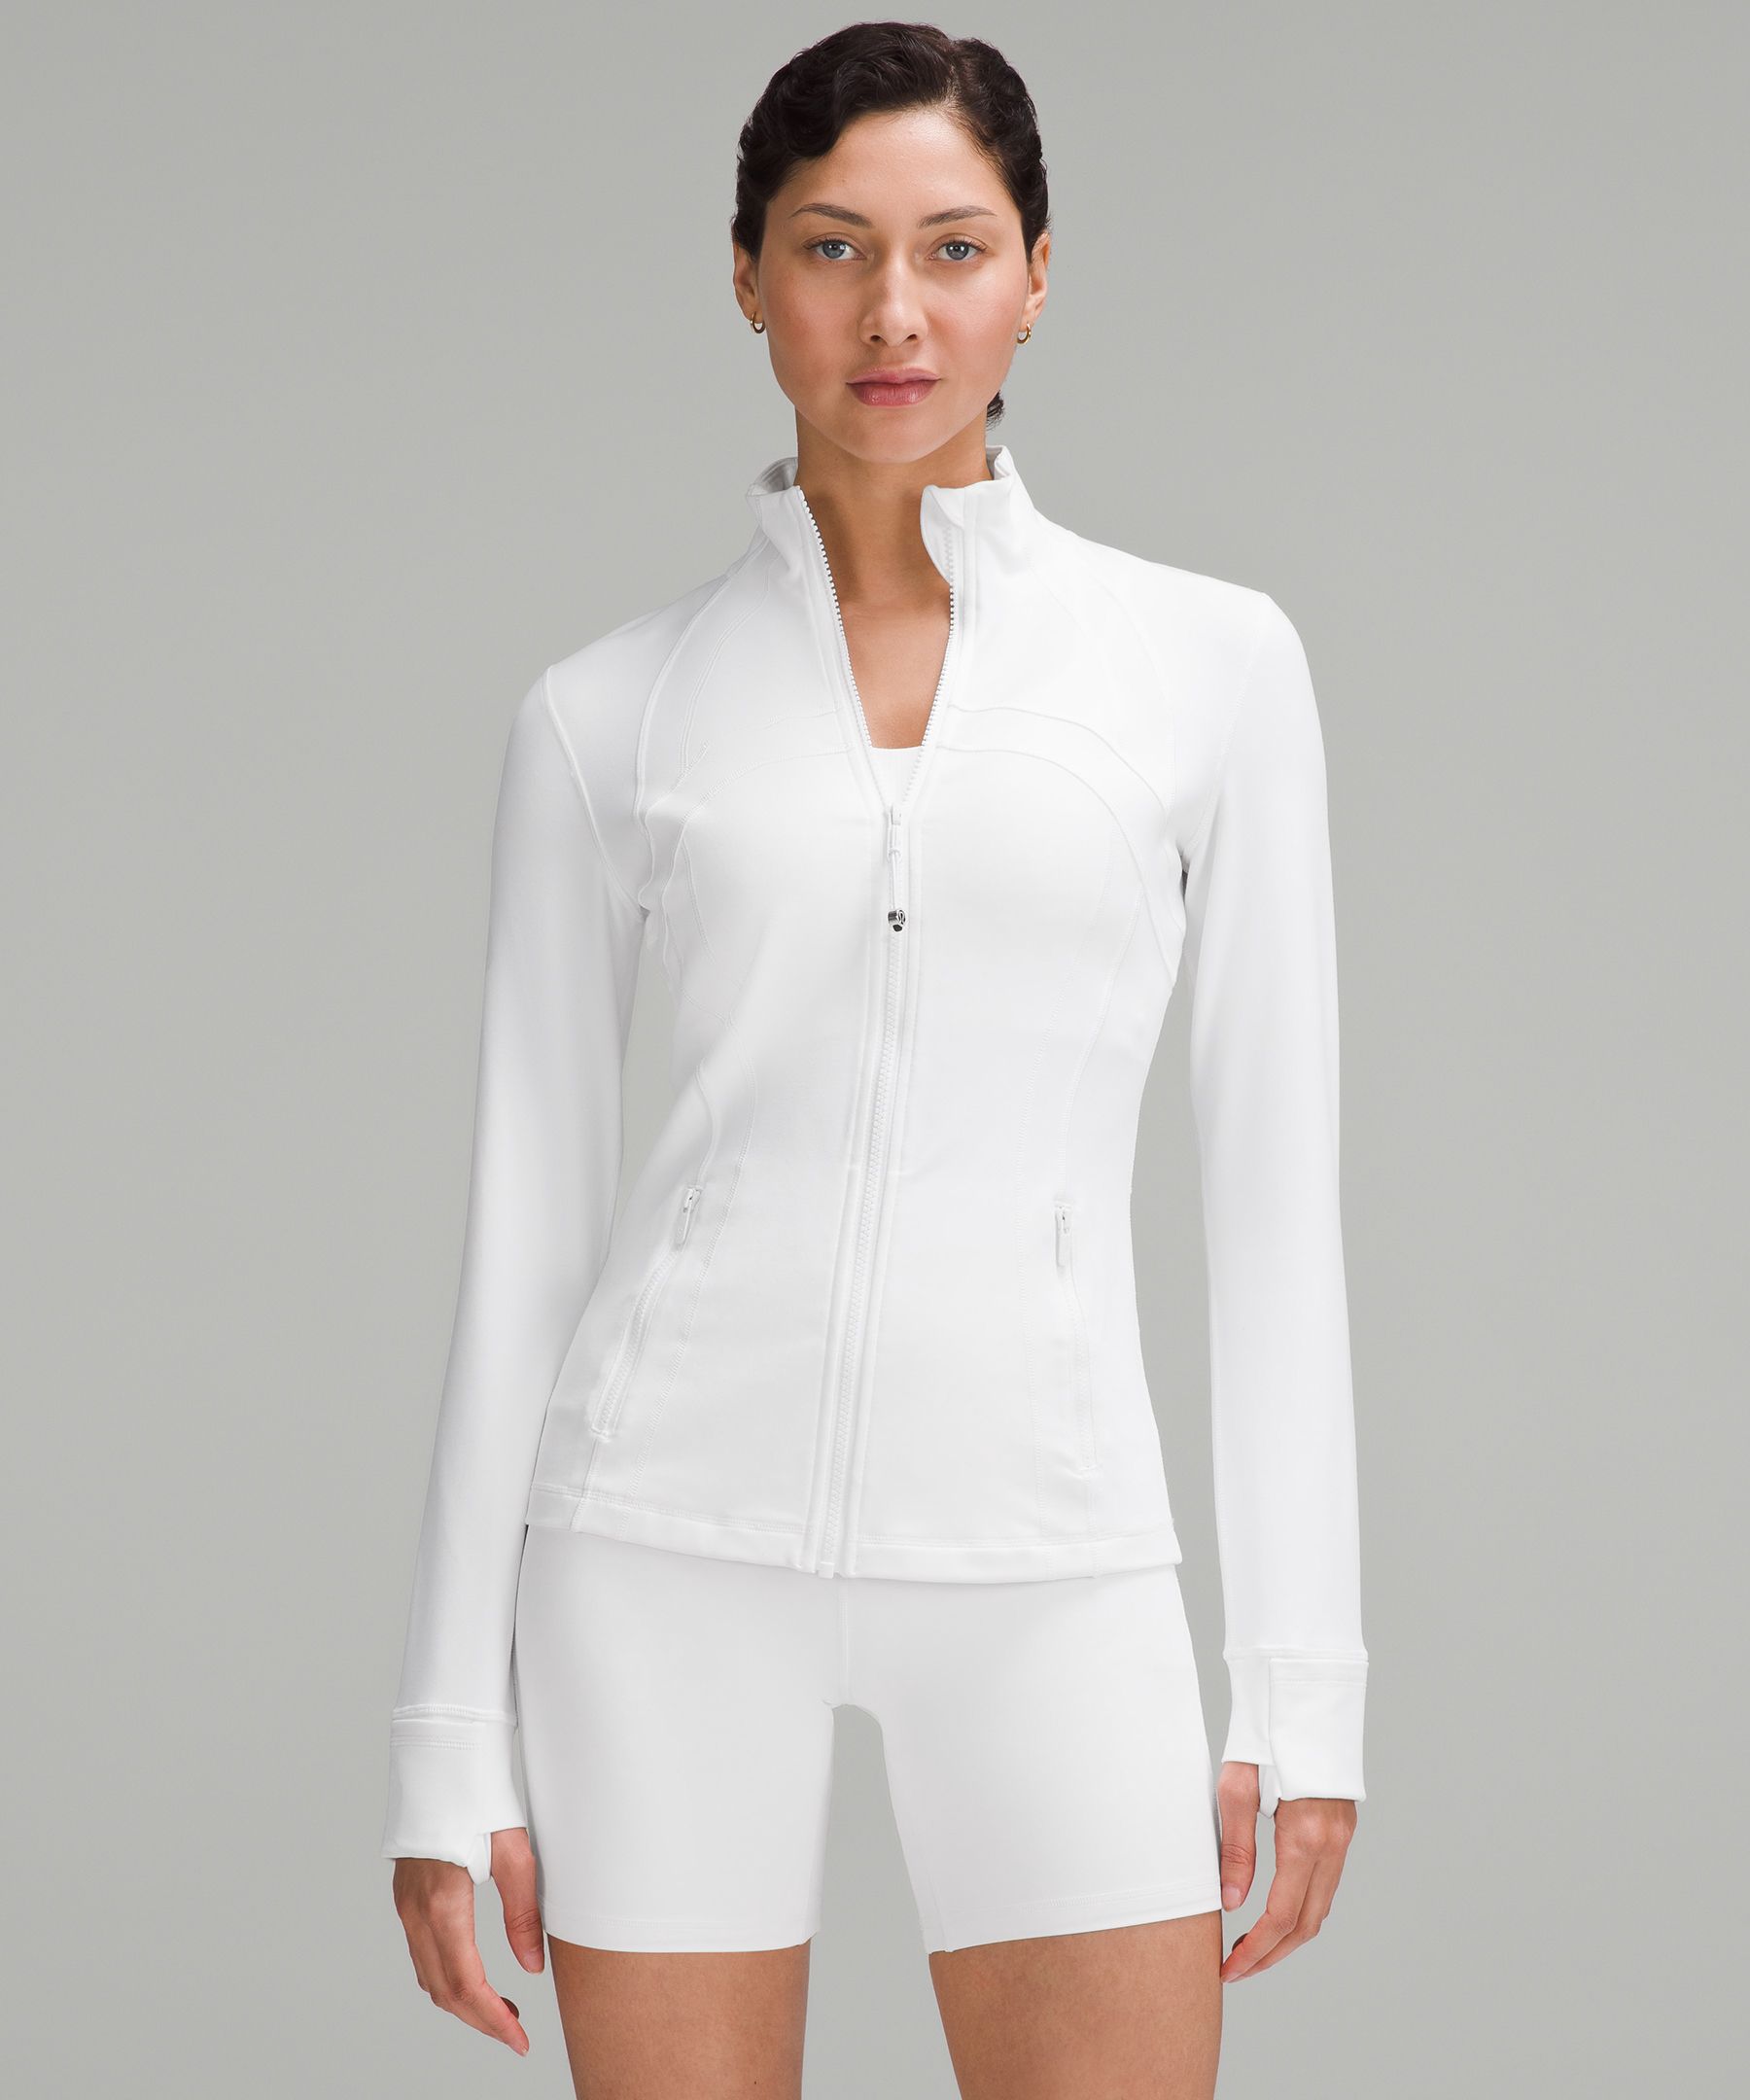 what do we think?? could I wear the set and jacket together? or I coul, Lululemon